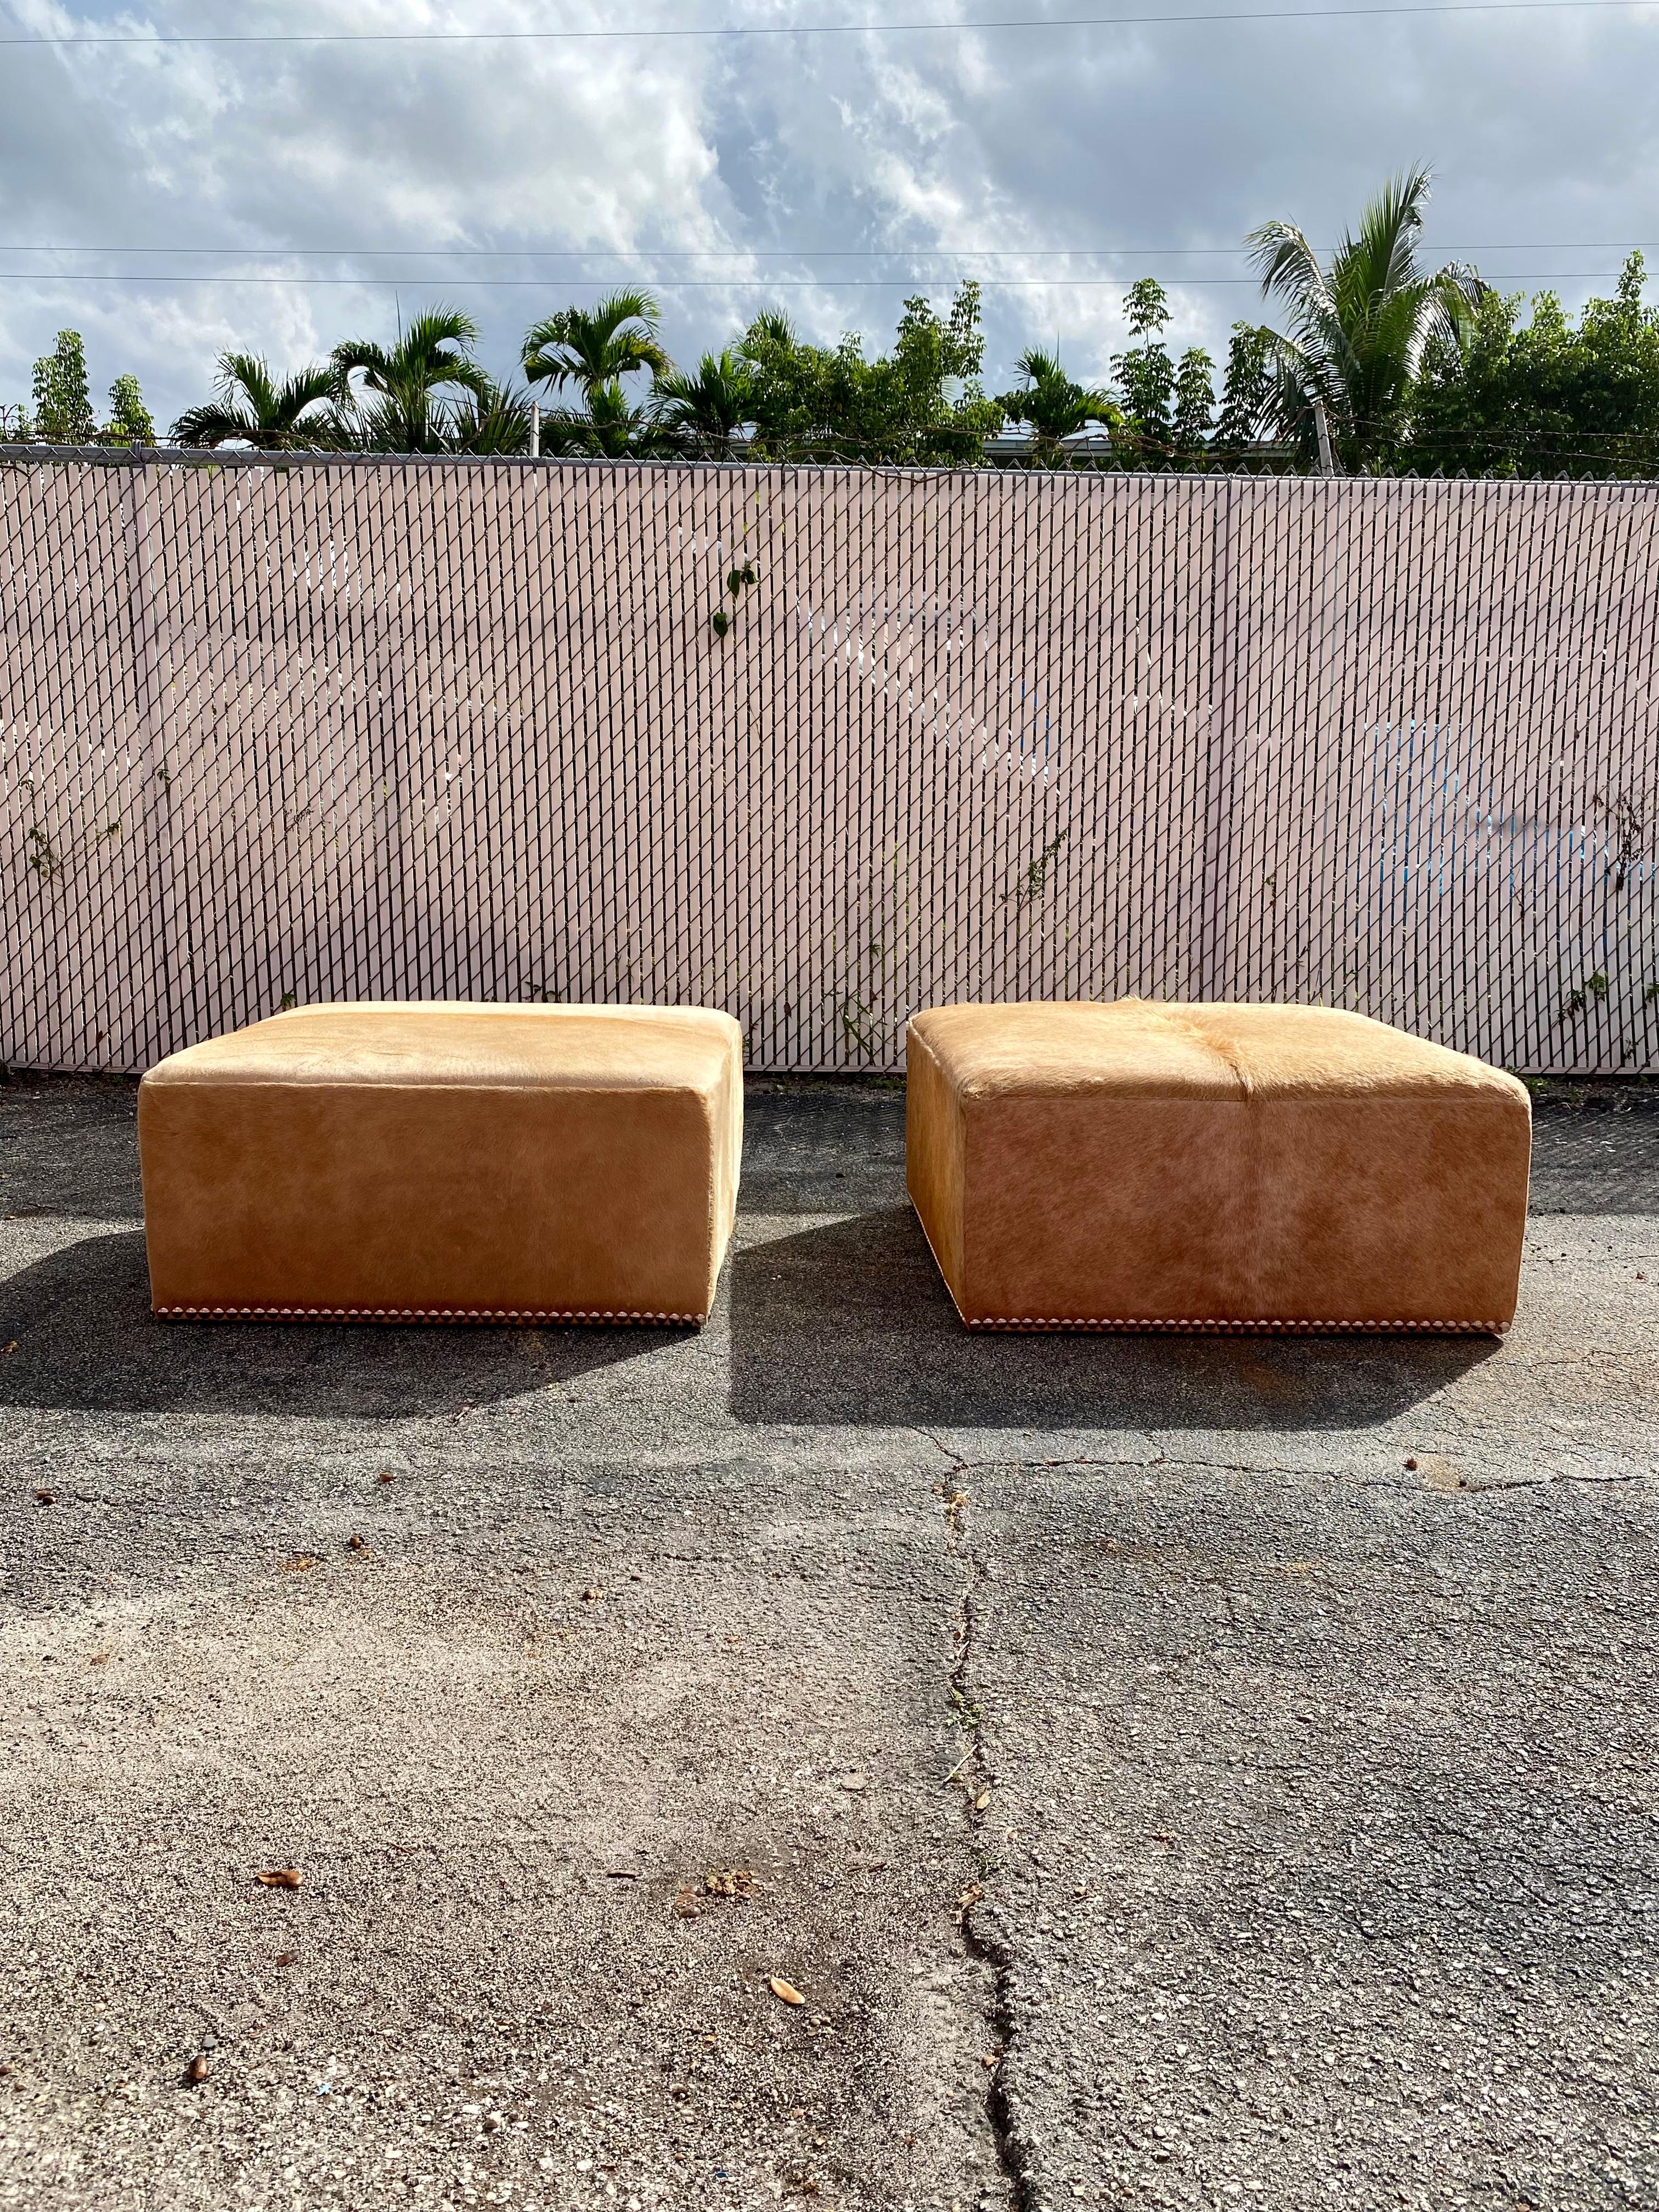 On offer on this occasion is one of the most stunning, cowhide ottomans you could hope to find. This is an ultra rare opportunity to acquire what is, unequivocally, the best of the best, it being a most spectacular and beautifully-presented chairs.